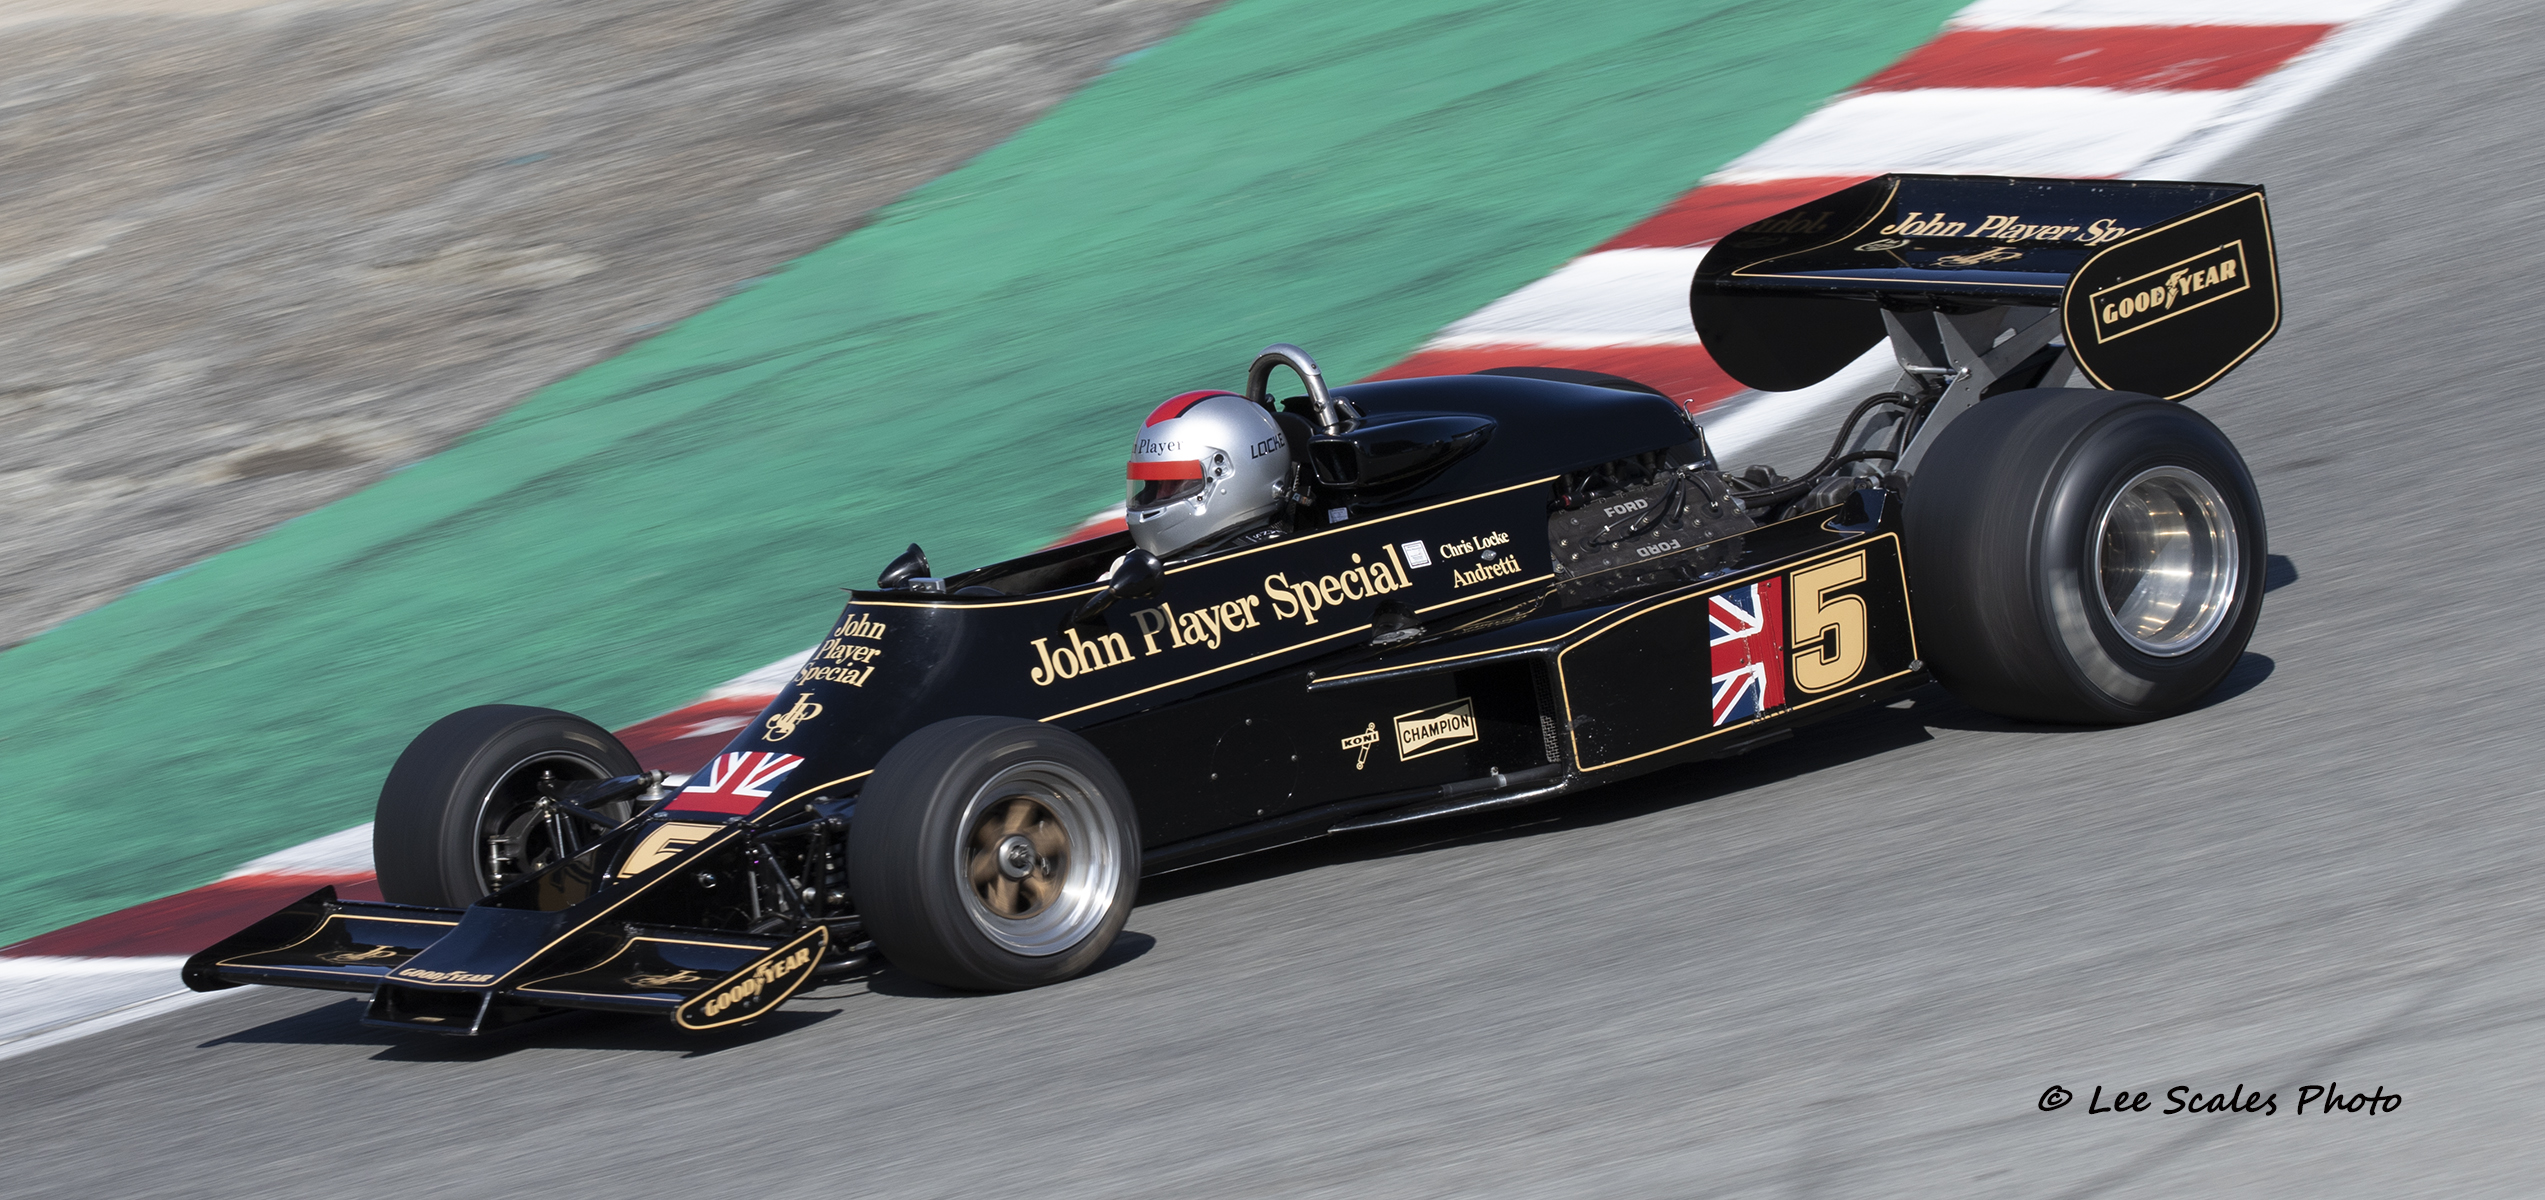 Classic Team Lotus is back in USA!